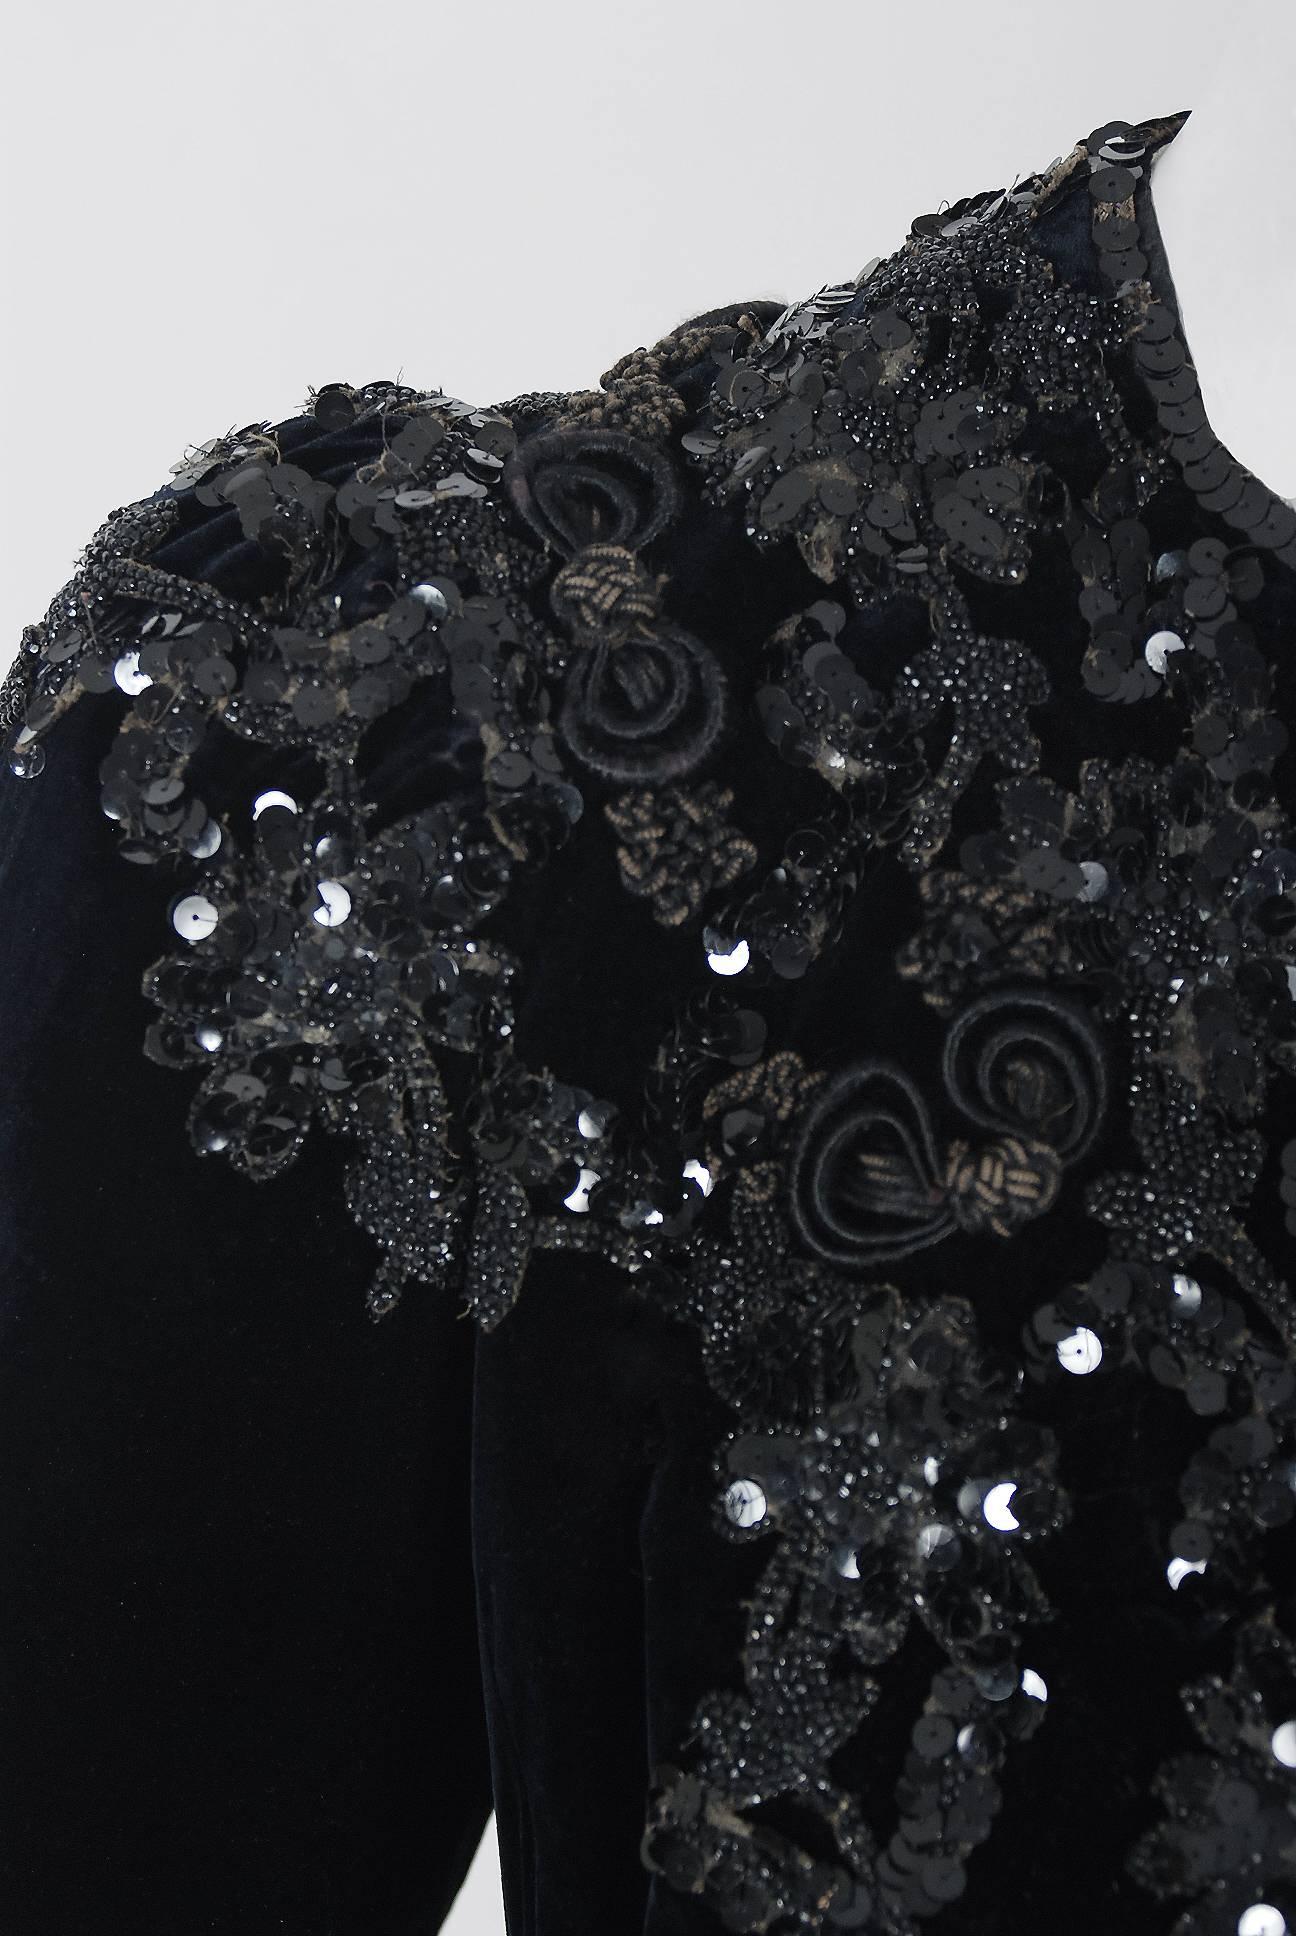 This sensational 1910's Louis Valentin designer couture Edwardian jacket is lavishly embellished with glossy jet-beads and sparkling sequins throughout. The highly stylized applique work perfectly captures the Art Nouveau aesthetic. Luxurious black